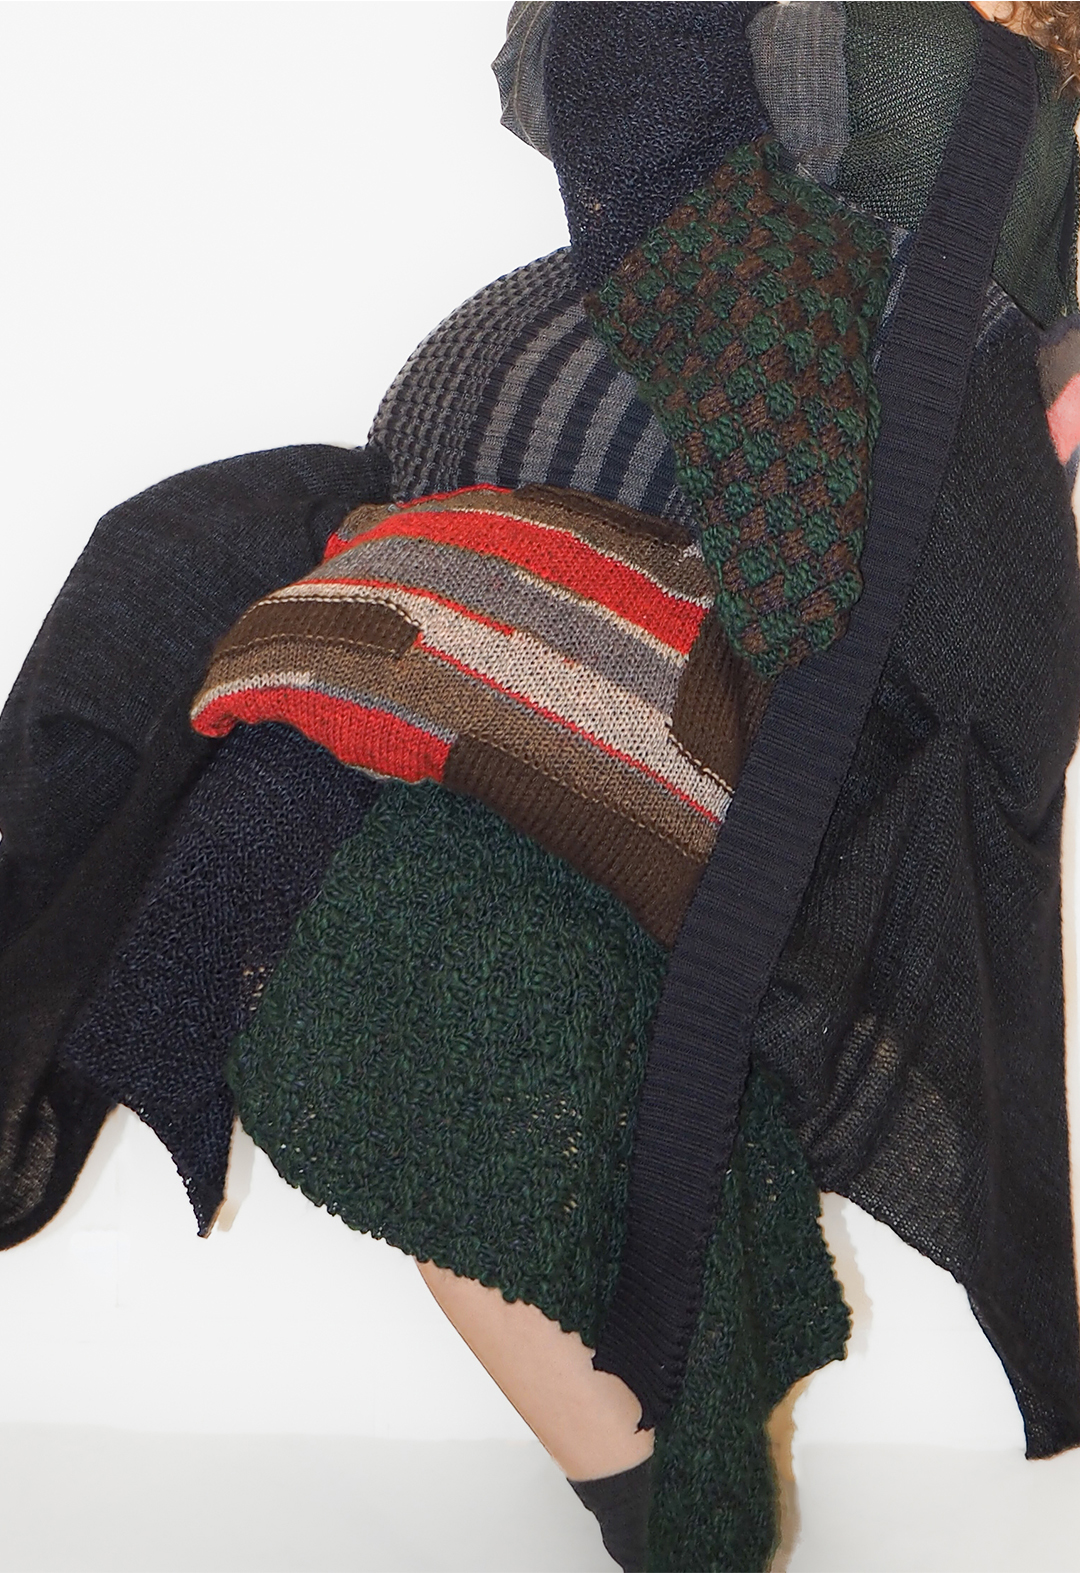 The photo shows a detail view of various fabrics and distorted shapes of a patchwork dress